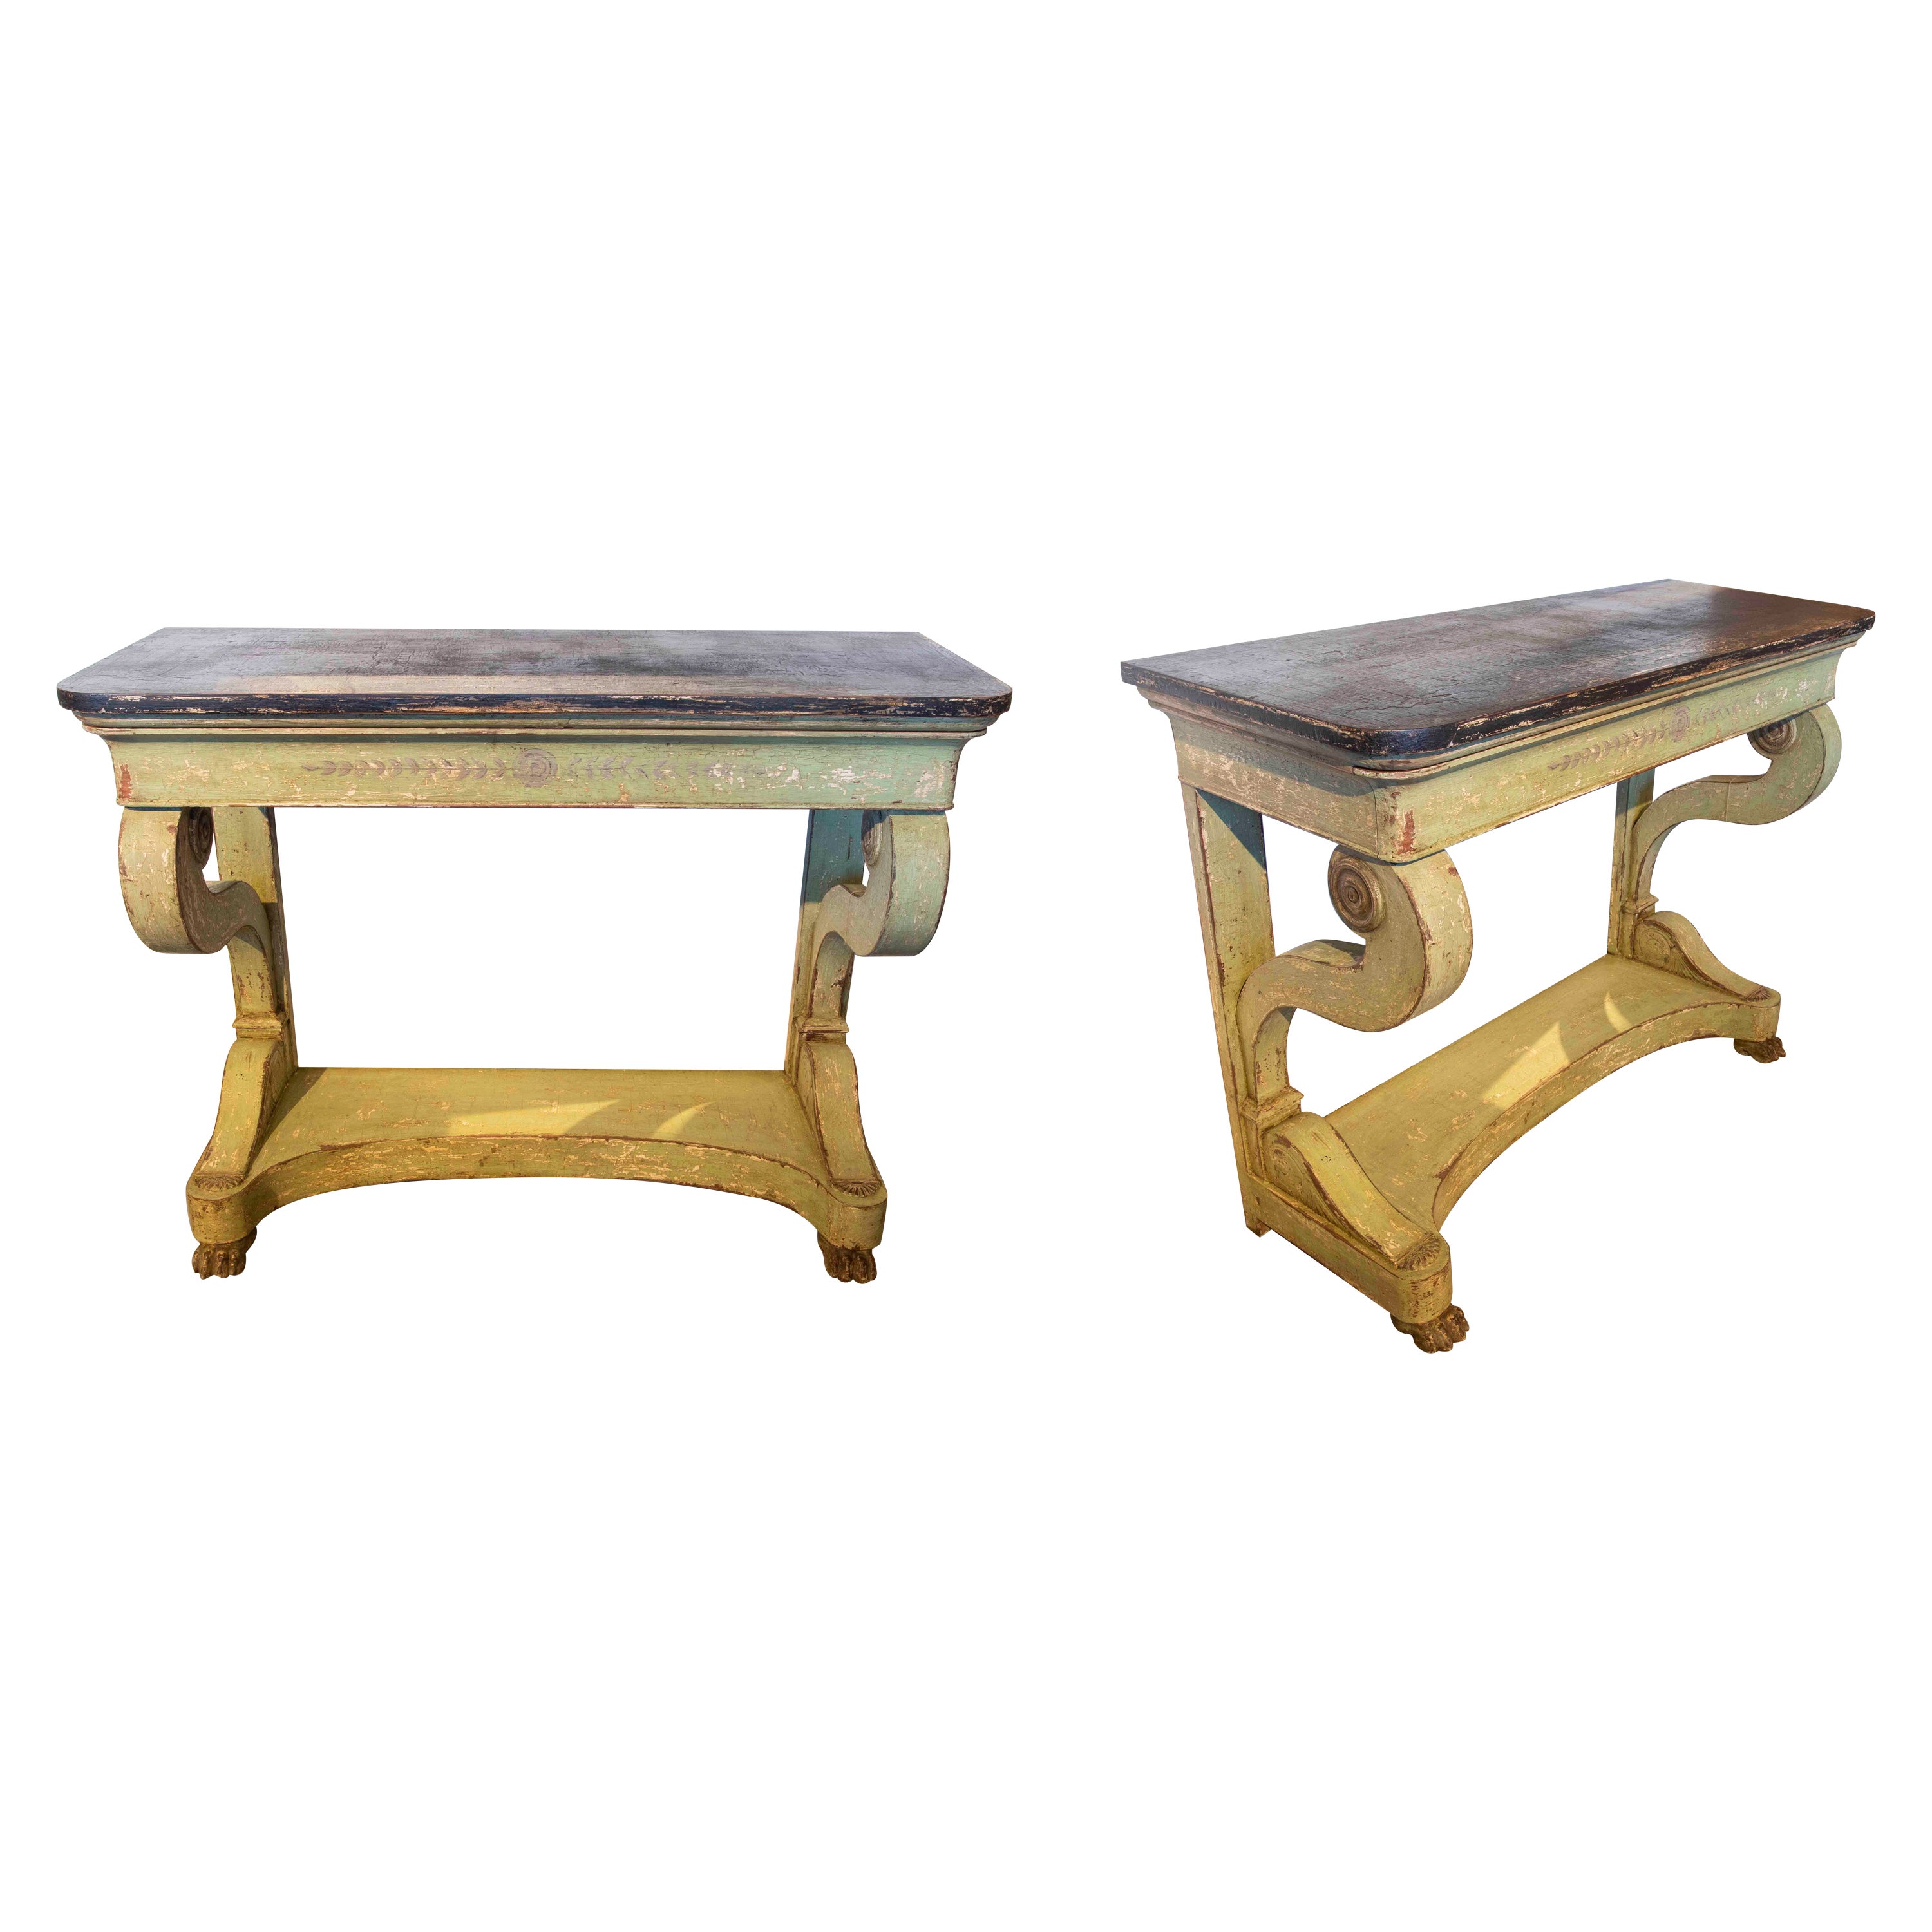 Pair of Polychromed Wooden Consoles in Green Tone with Claw Legs